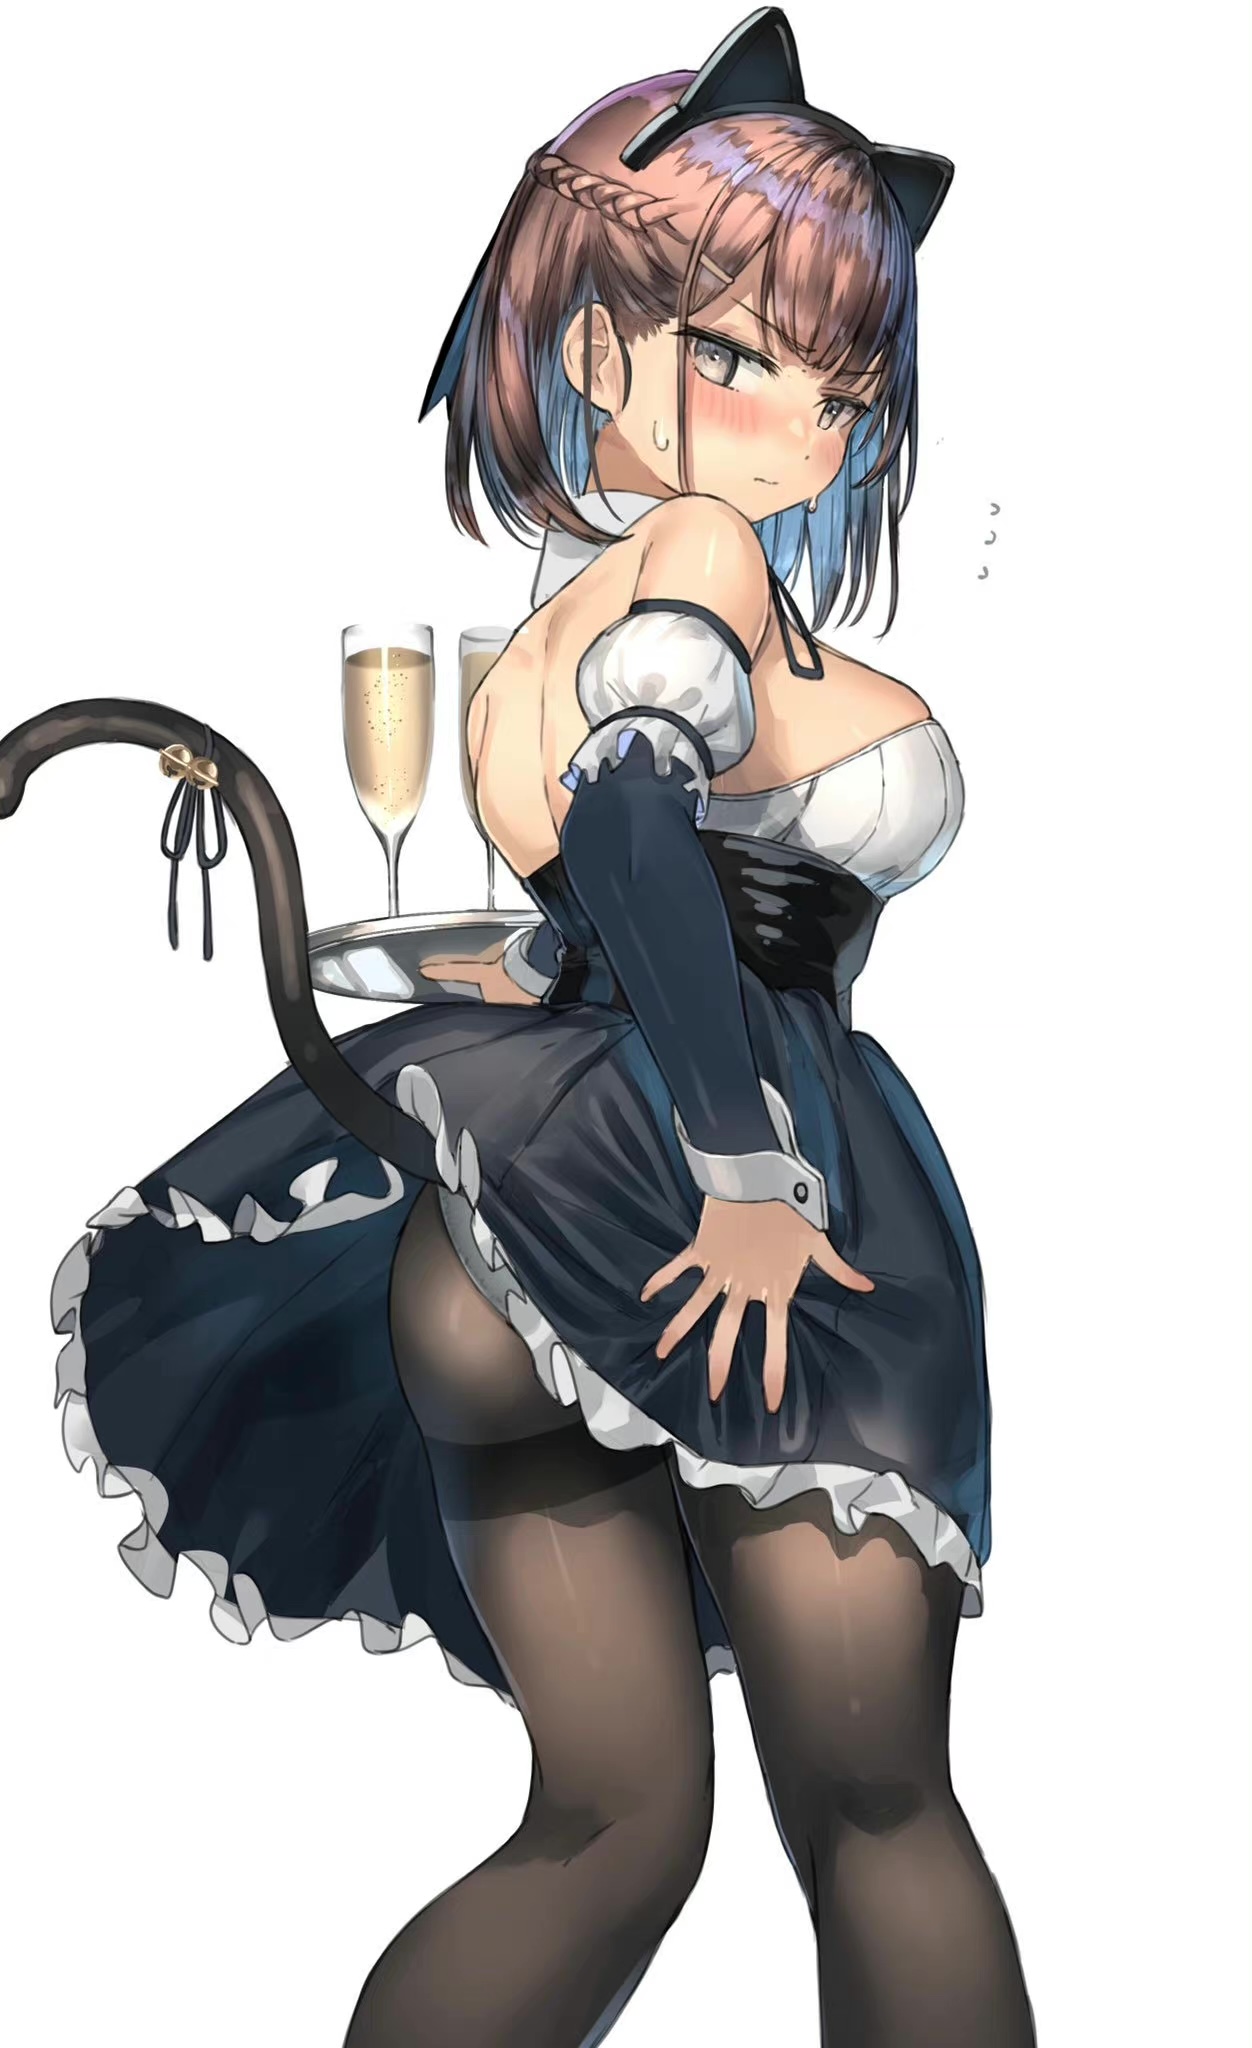 Anime 1252x2048 anime girls cat girl maid outfit upskirt pantyhose artwork Ranf portrait display maid blushing champagne braids cat tail cat ears big boobs